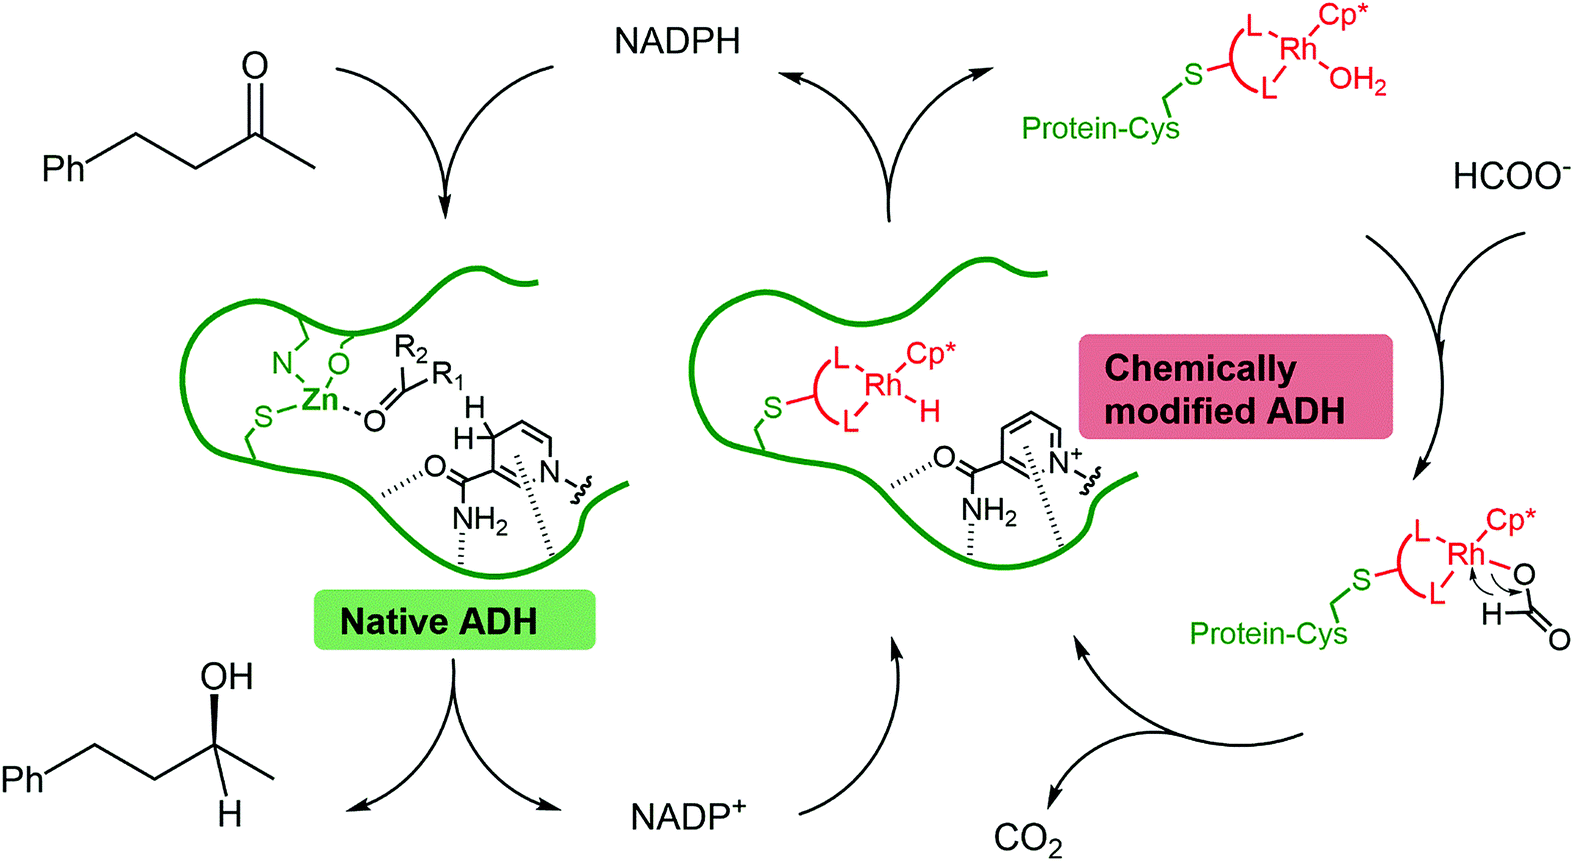 Synthesis of chiral alcohols via two interconnected cycles: the wild type enzyme (native ADH) reduces the ketone to the alcohol using NADPH as a reducing agent. NADPH is regenerated using the mutant enzyme containing a rhodium active site (chemically modified ADH) with formic acid as the terminal reductant. Alcohol dehydrogenase